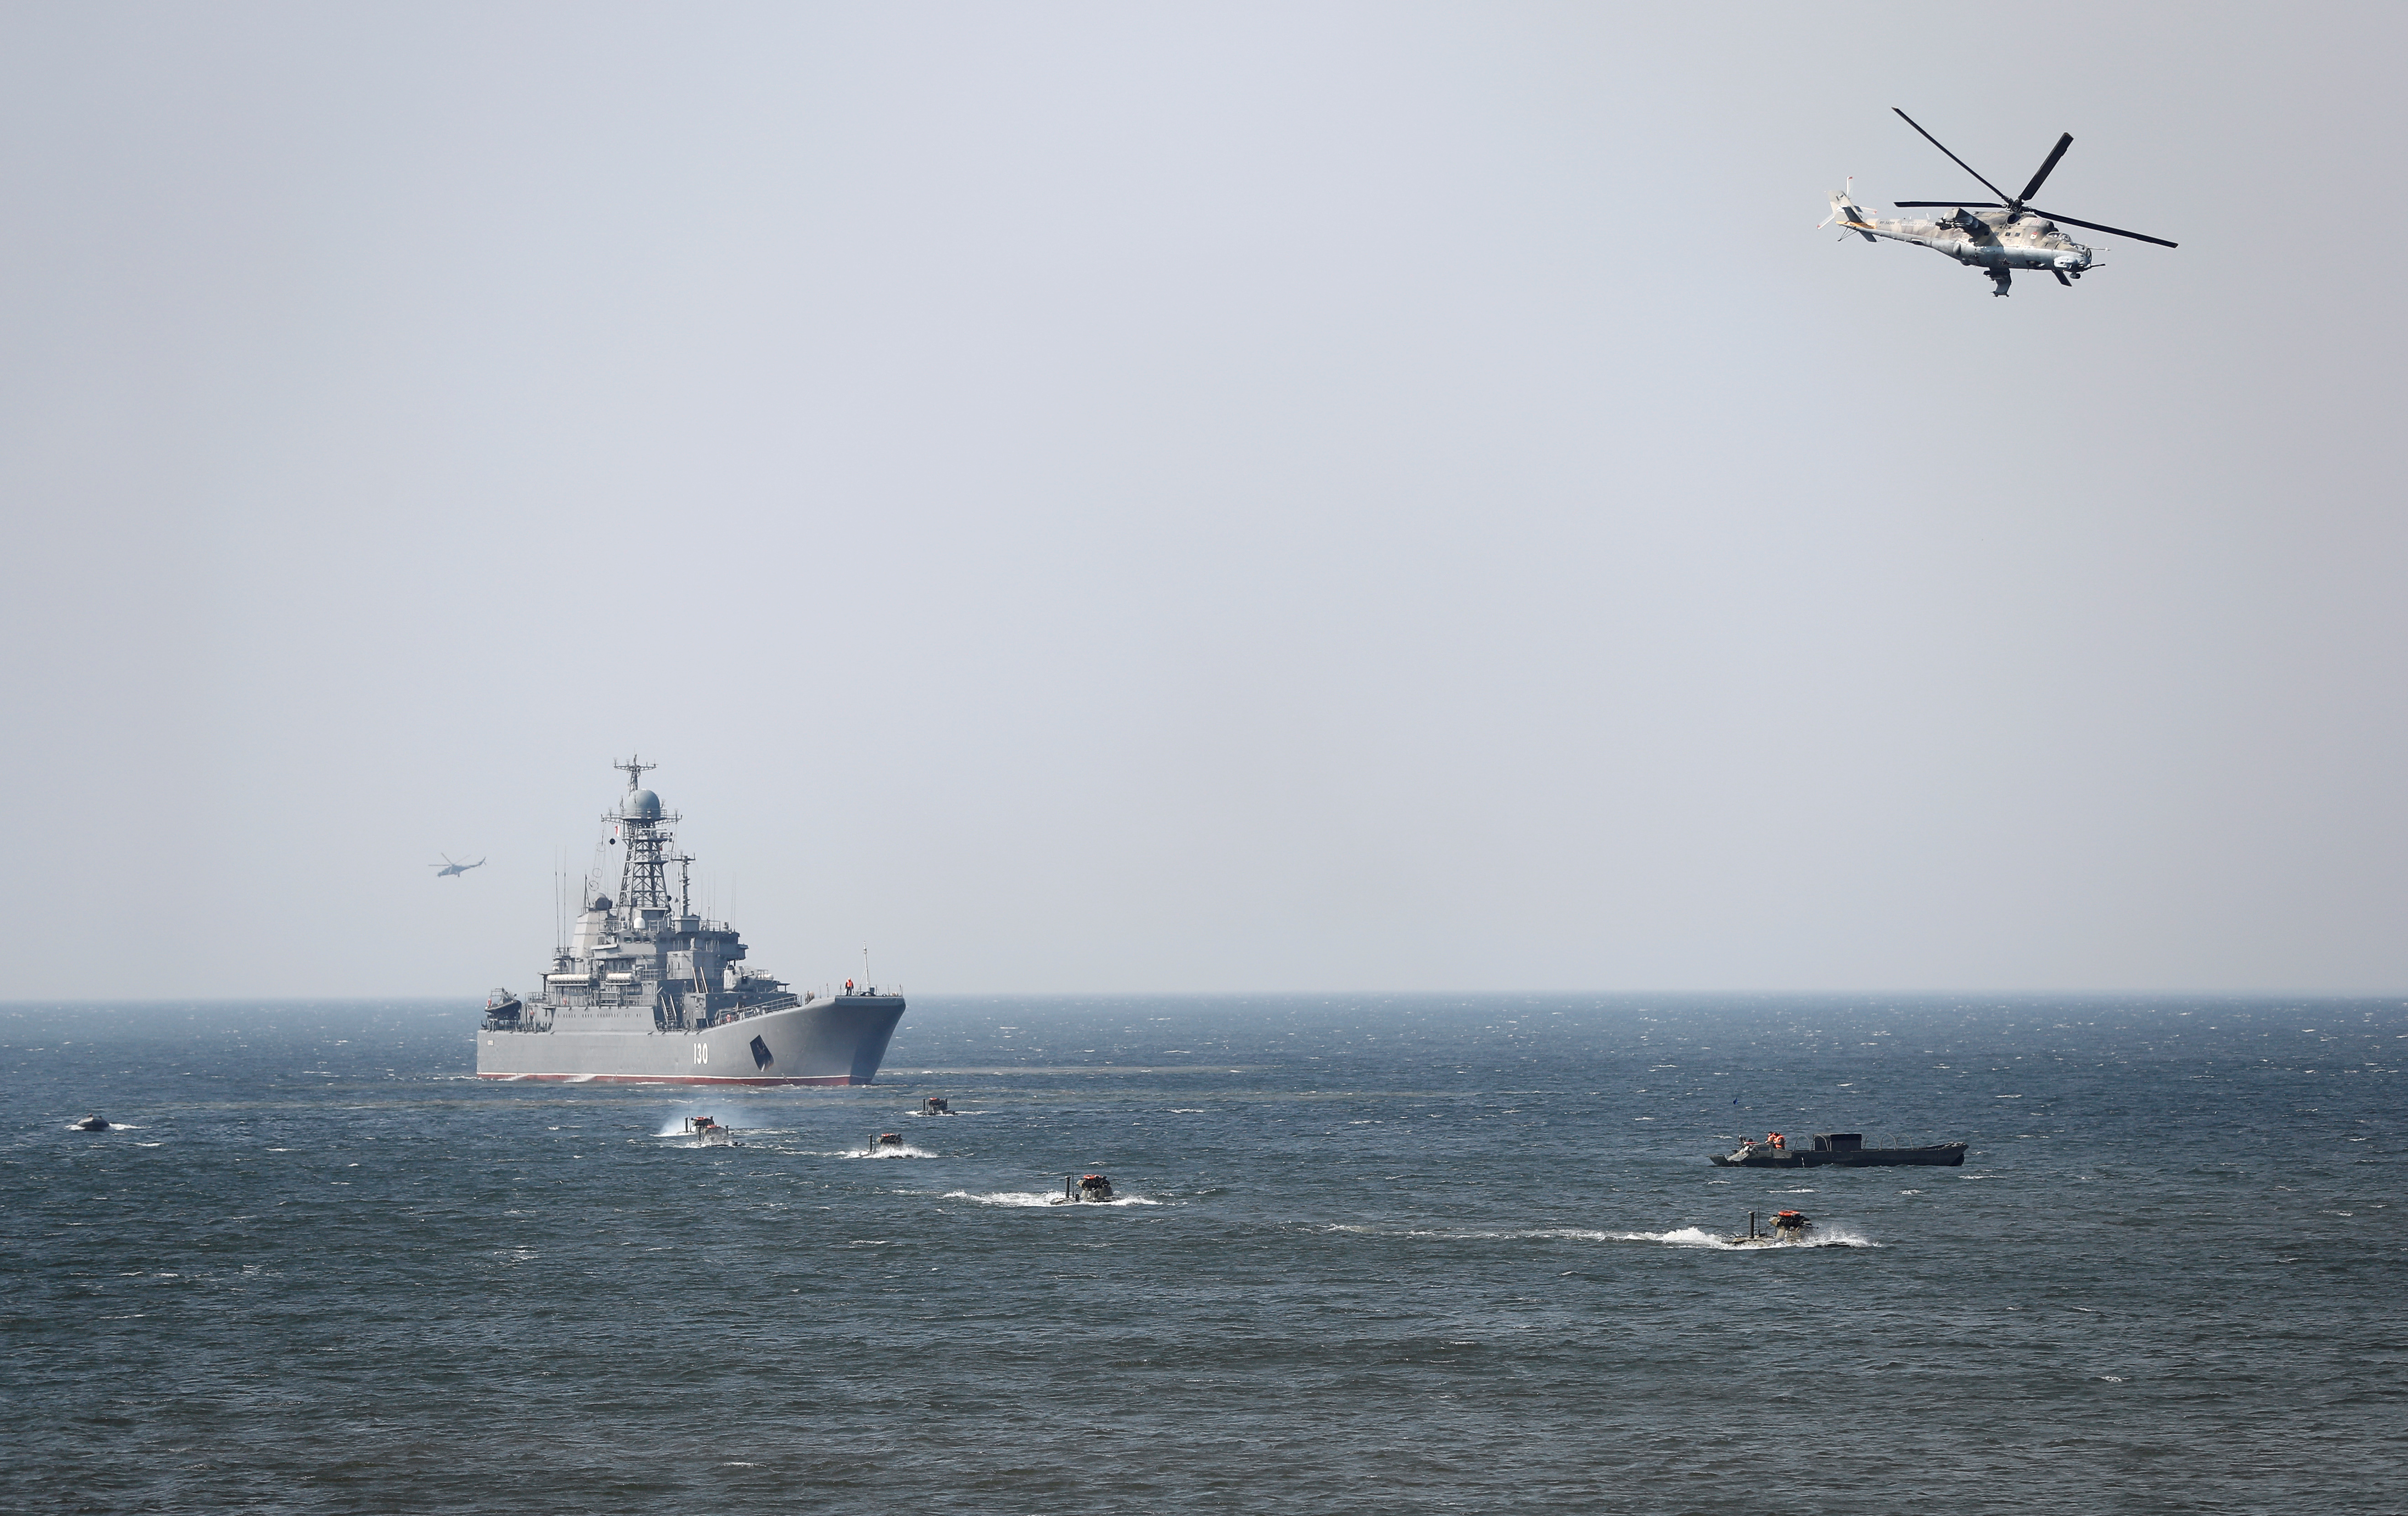 An amphibious assault ship, armored personnel carriers and helicopters are seen during military exercises of the Russian Navy in Kaliningrad Region